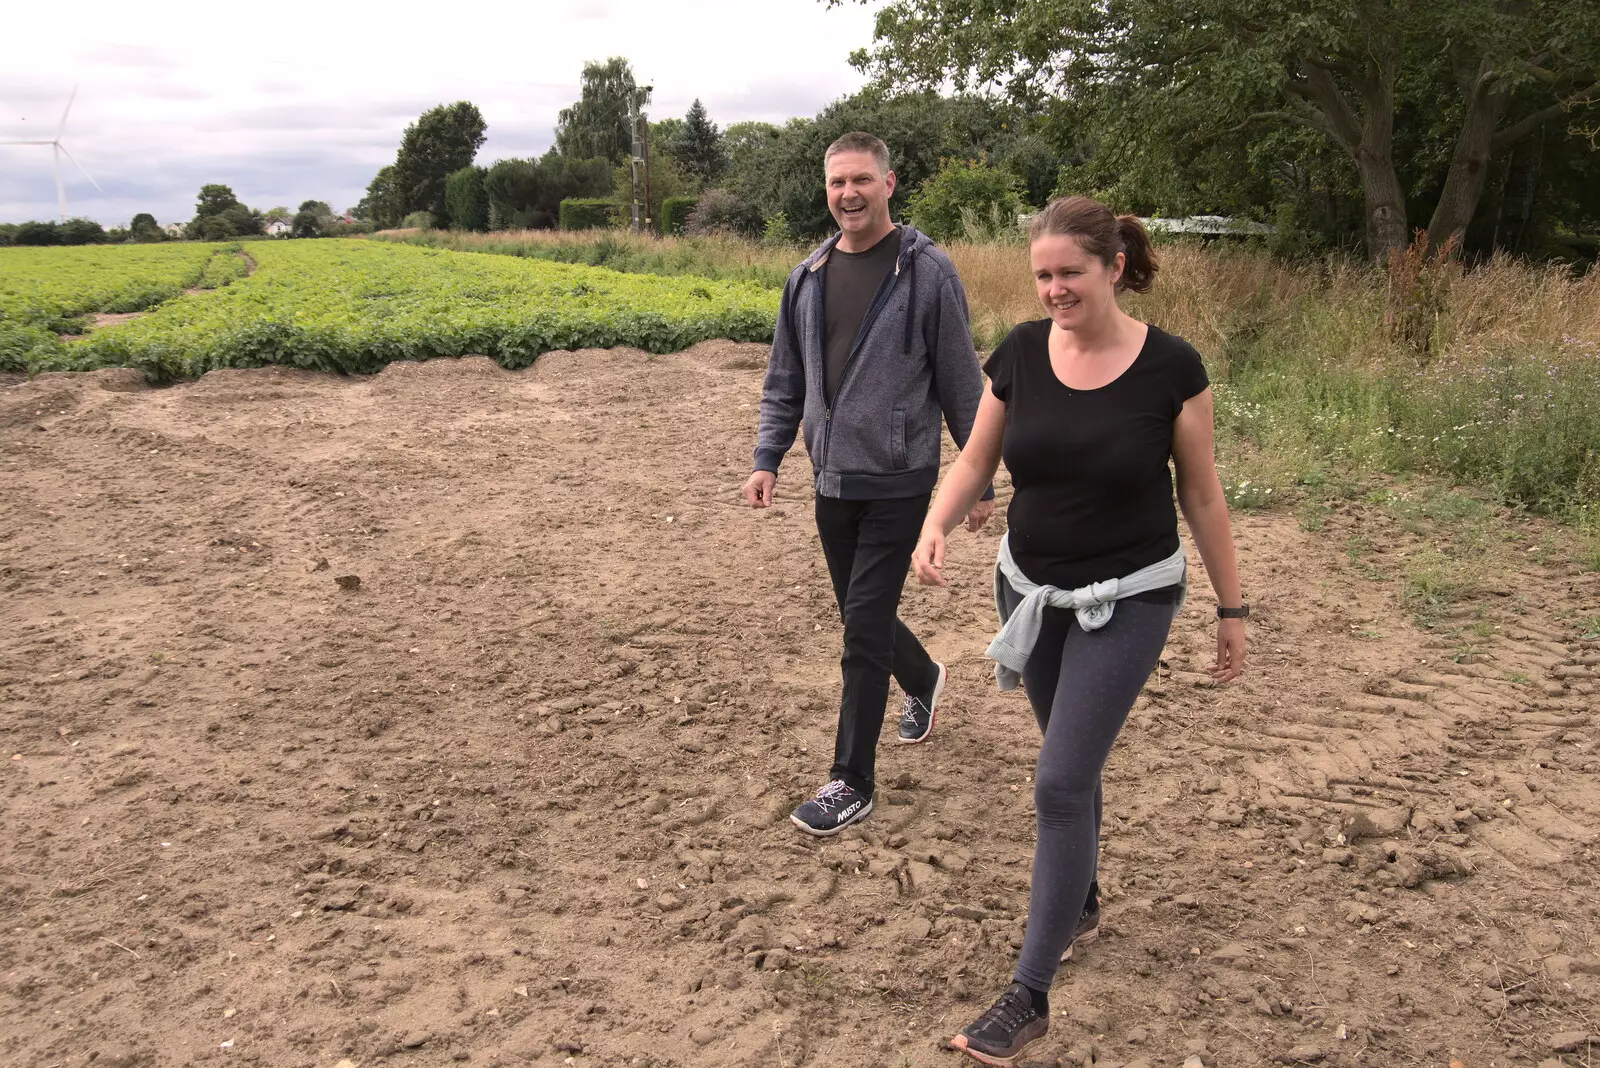 Sean and Isobel stride across the fields, from Meg-fest, and Sean Visits, Bressingham and Brome, Suffolk - 1st August 2021